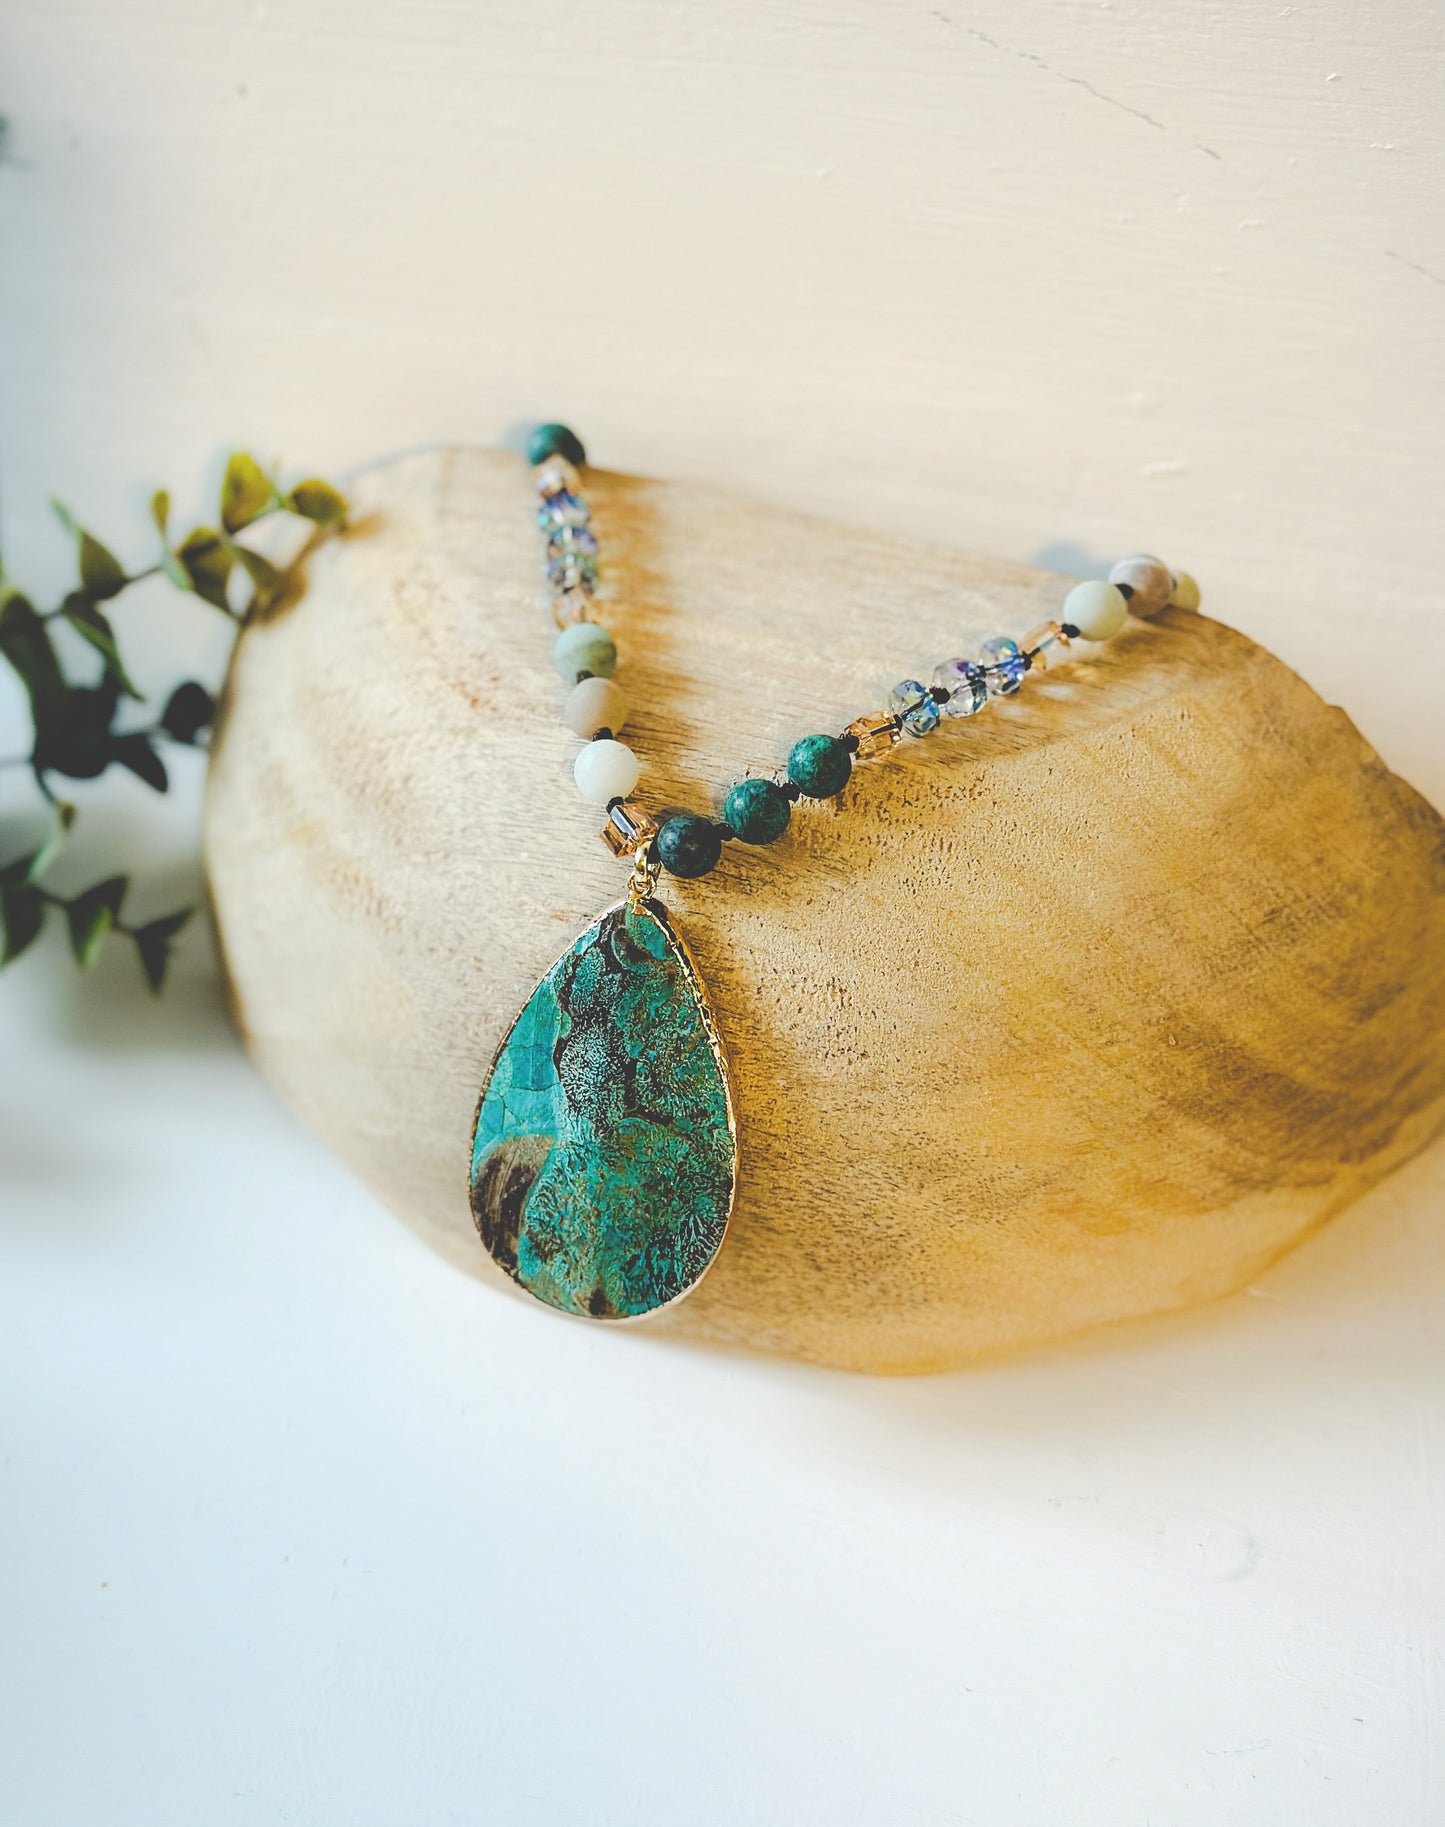 Introducing the "Alani Gemstone Pendant Necklace," a captivating blend of vibrant energies and artisanal craftsmanship. This exquisite necklace features carefully chosen African turquoise and Amazonite beads, creating a harmonious symphony of calming blues and earthy greens.